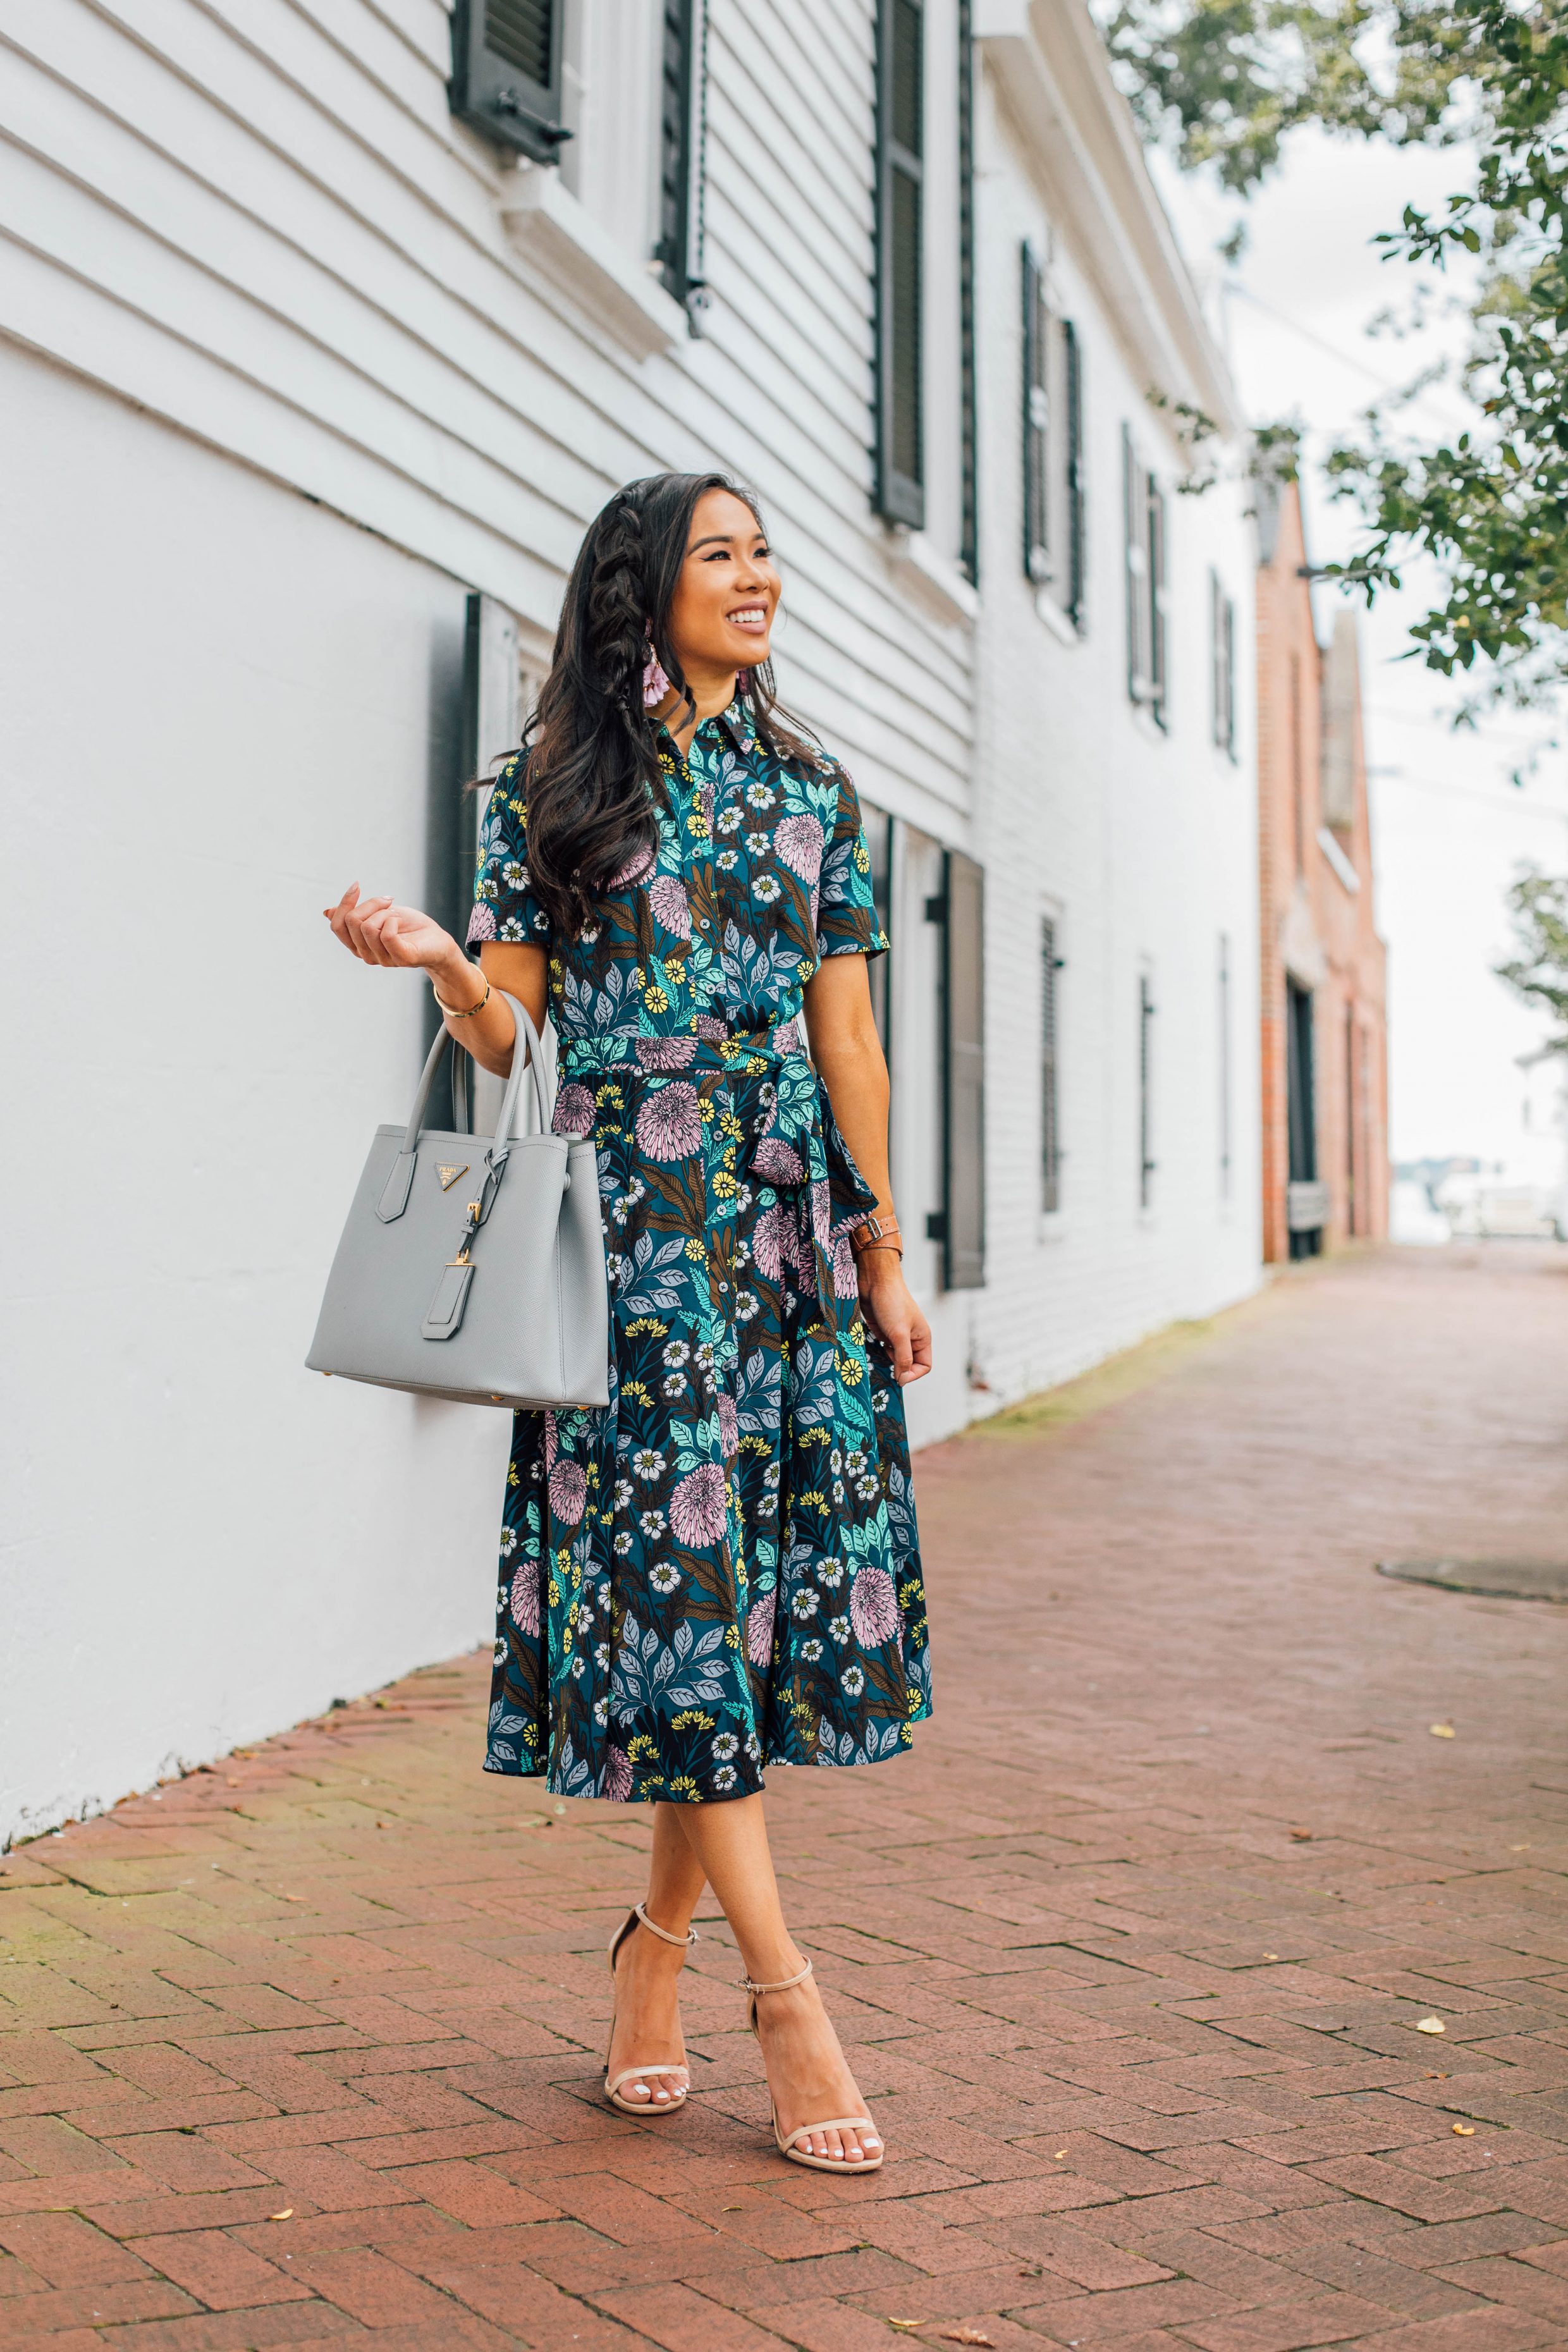 The Dress You Need For Fall